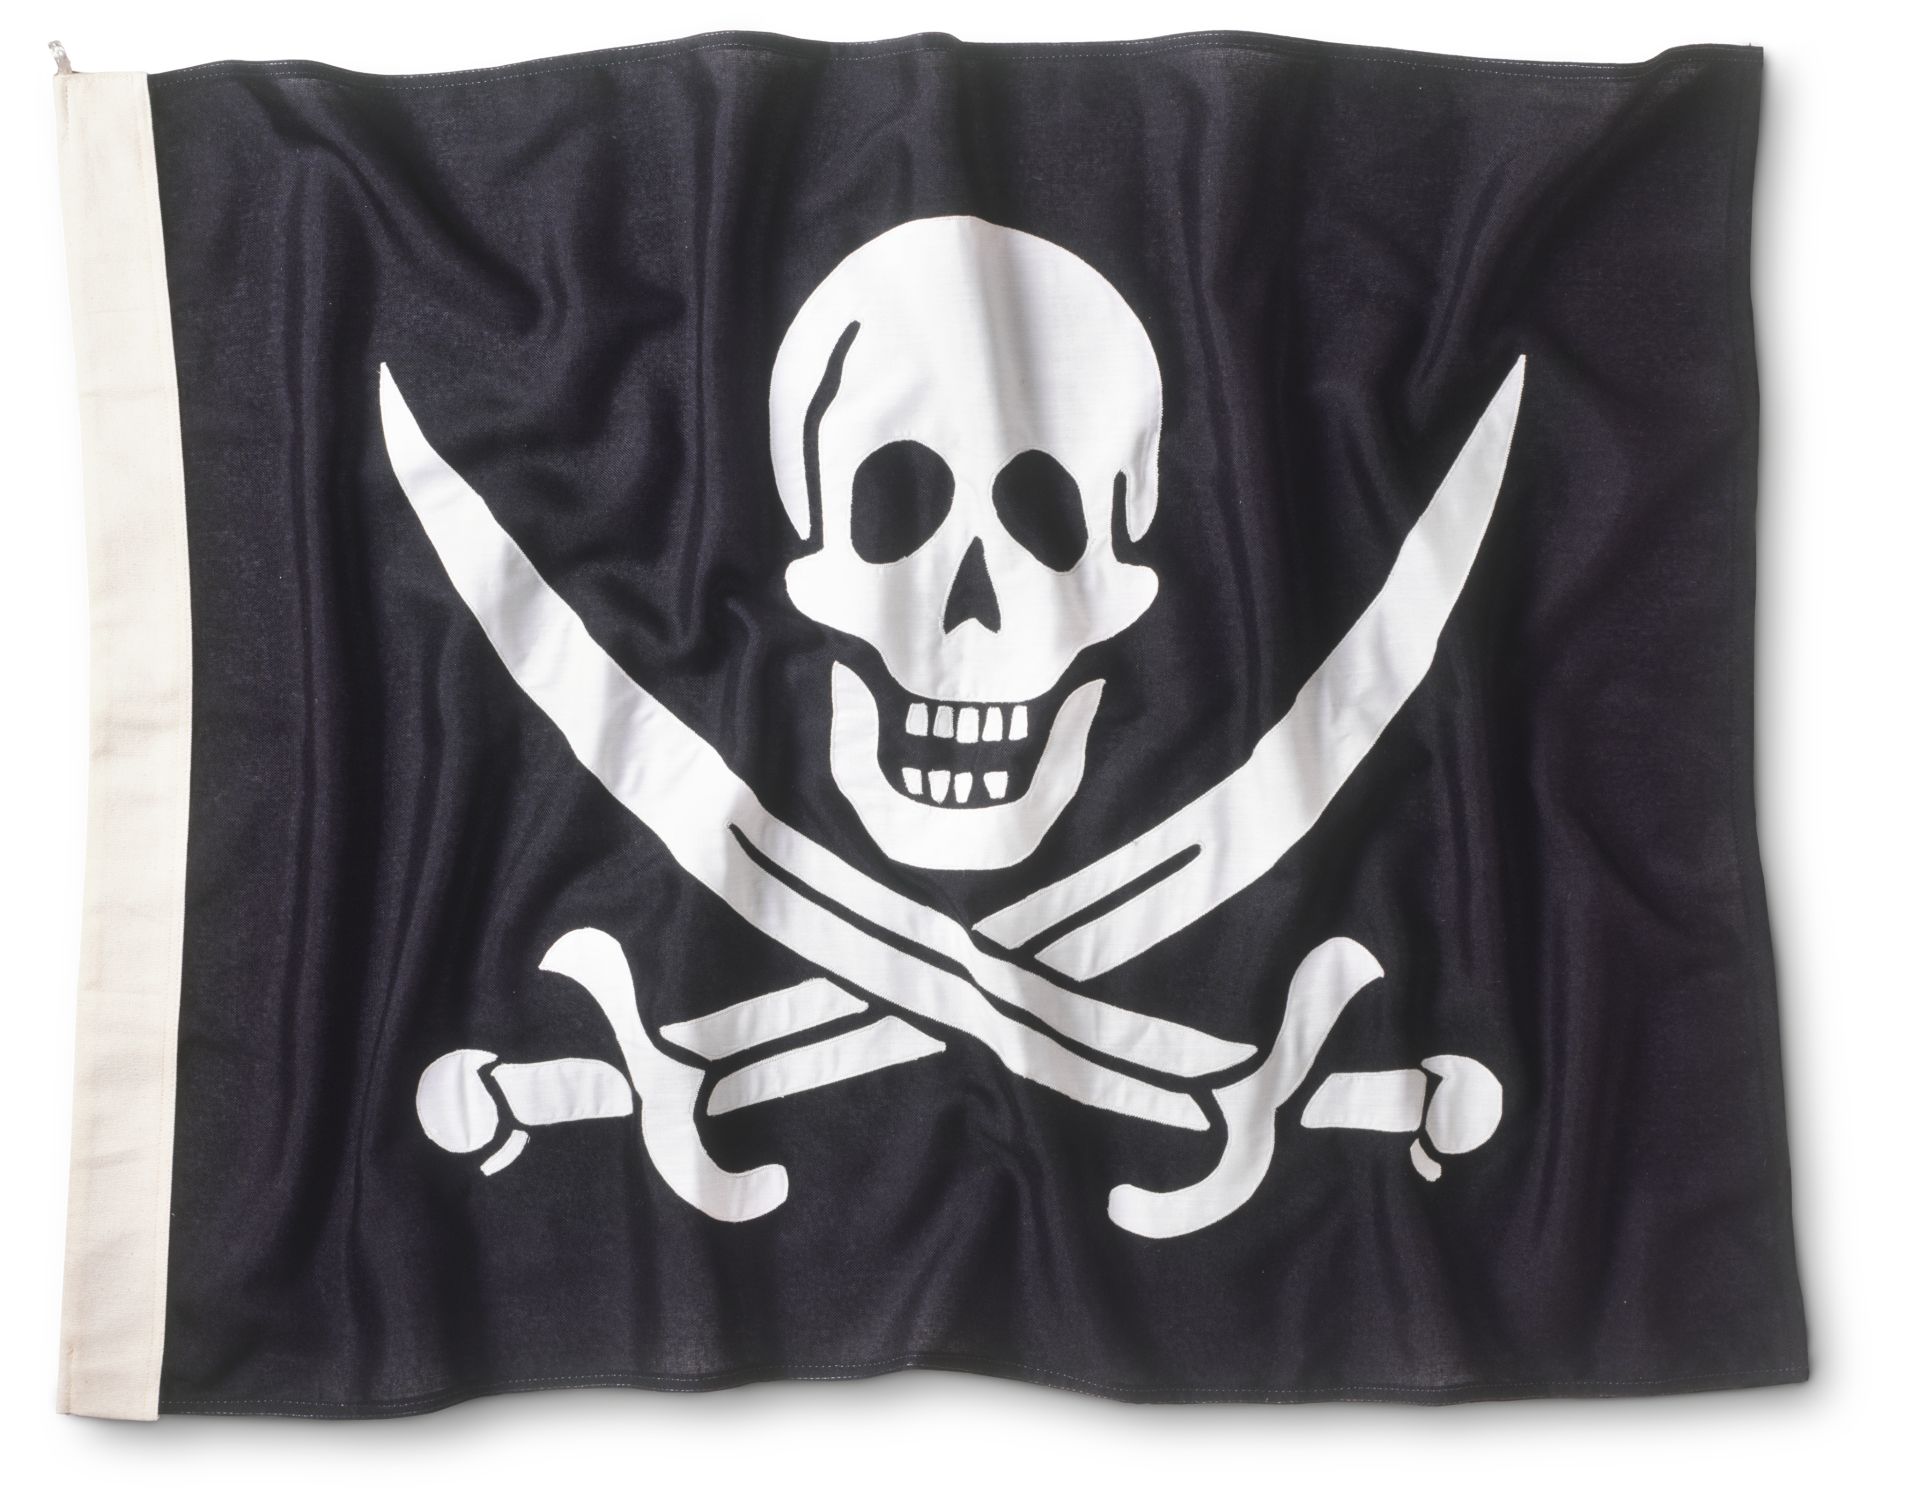 The Jolly Roger, Pirate Flag Meanings - Pirates of the Caribbean